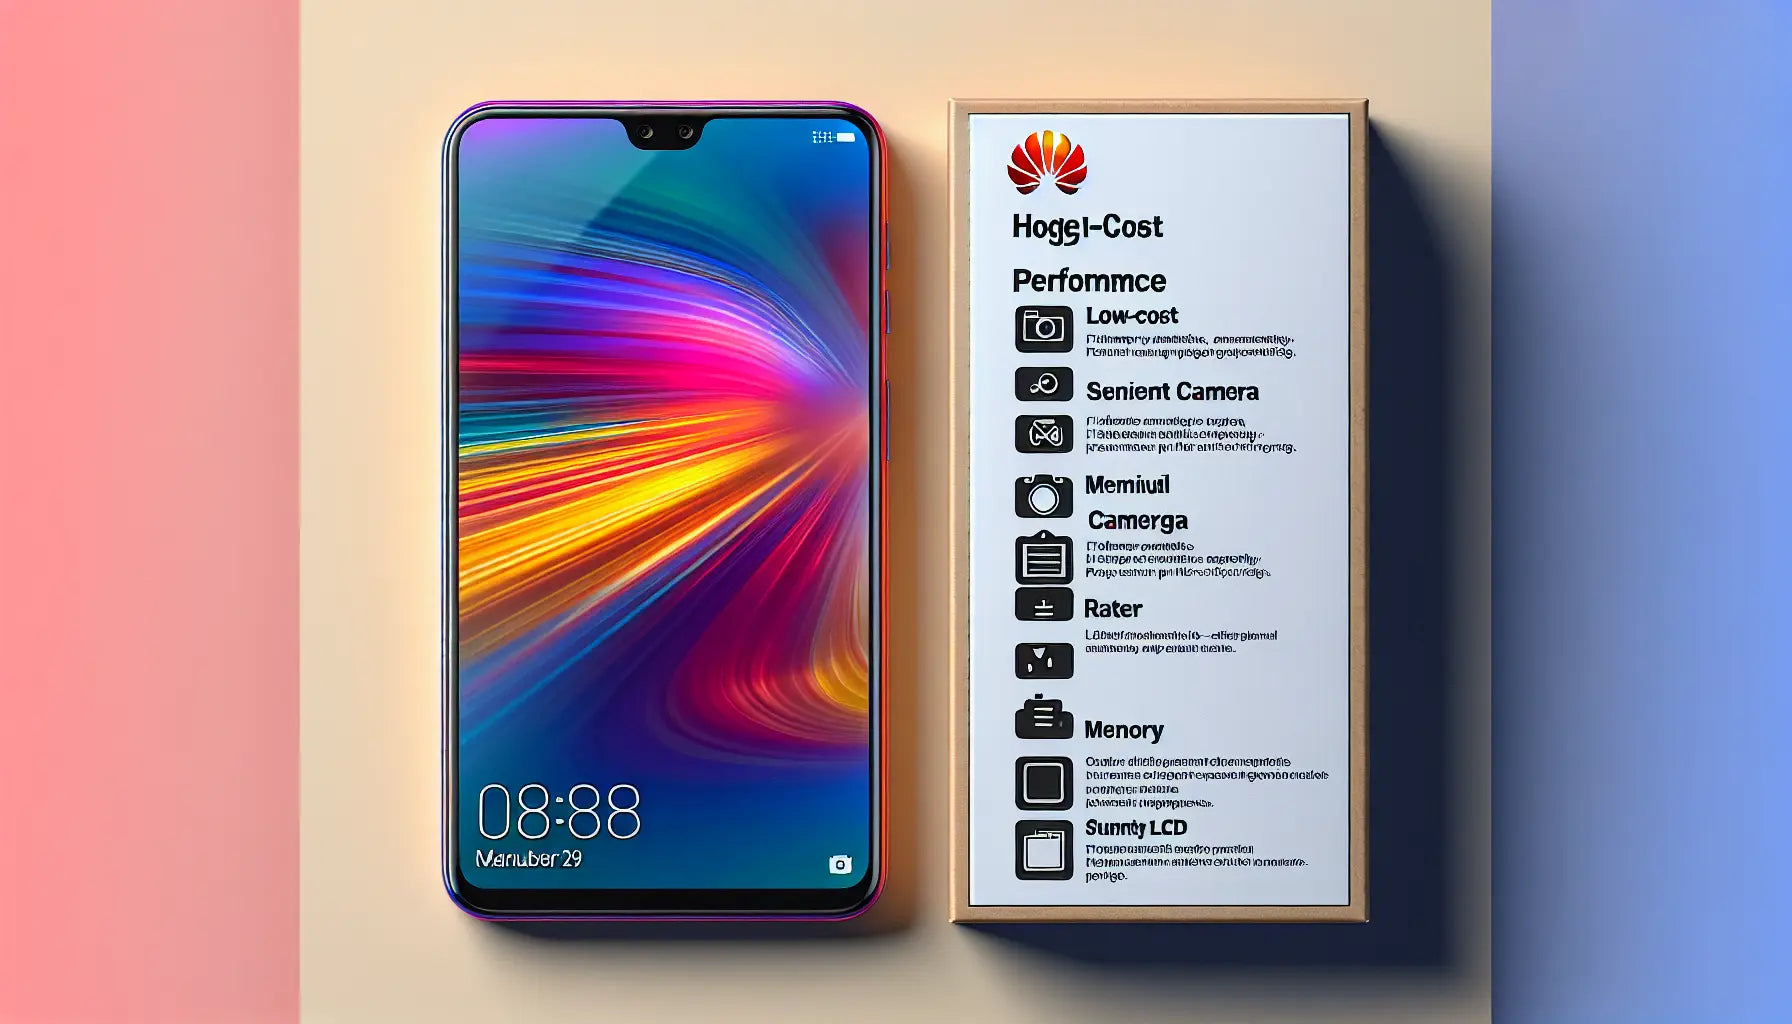 Huawei Y6 Prime 2019: Budget-Friendly Smartphone Unveiled